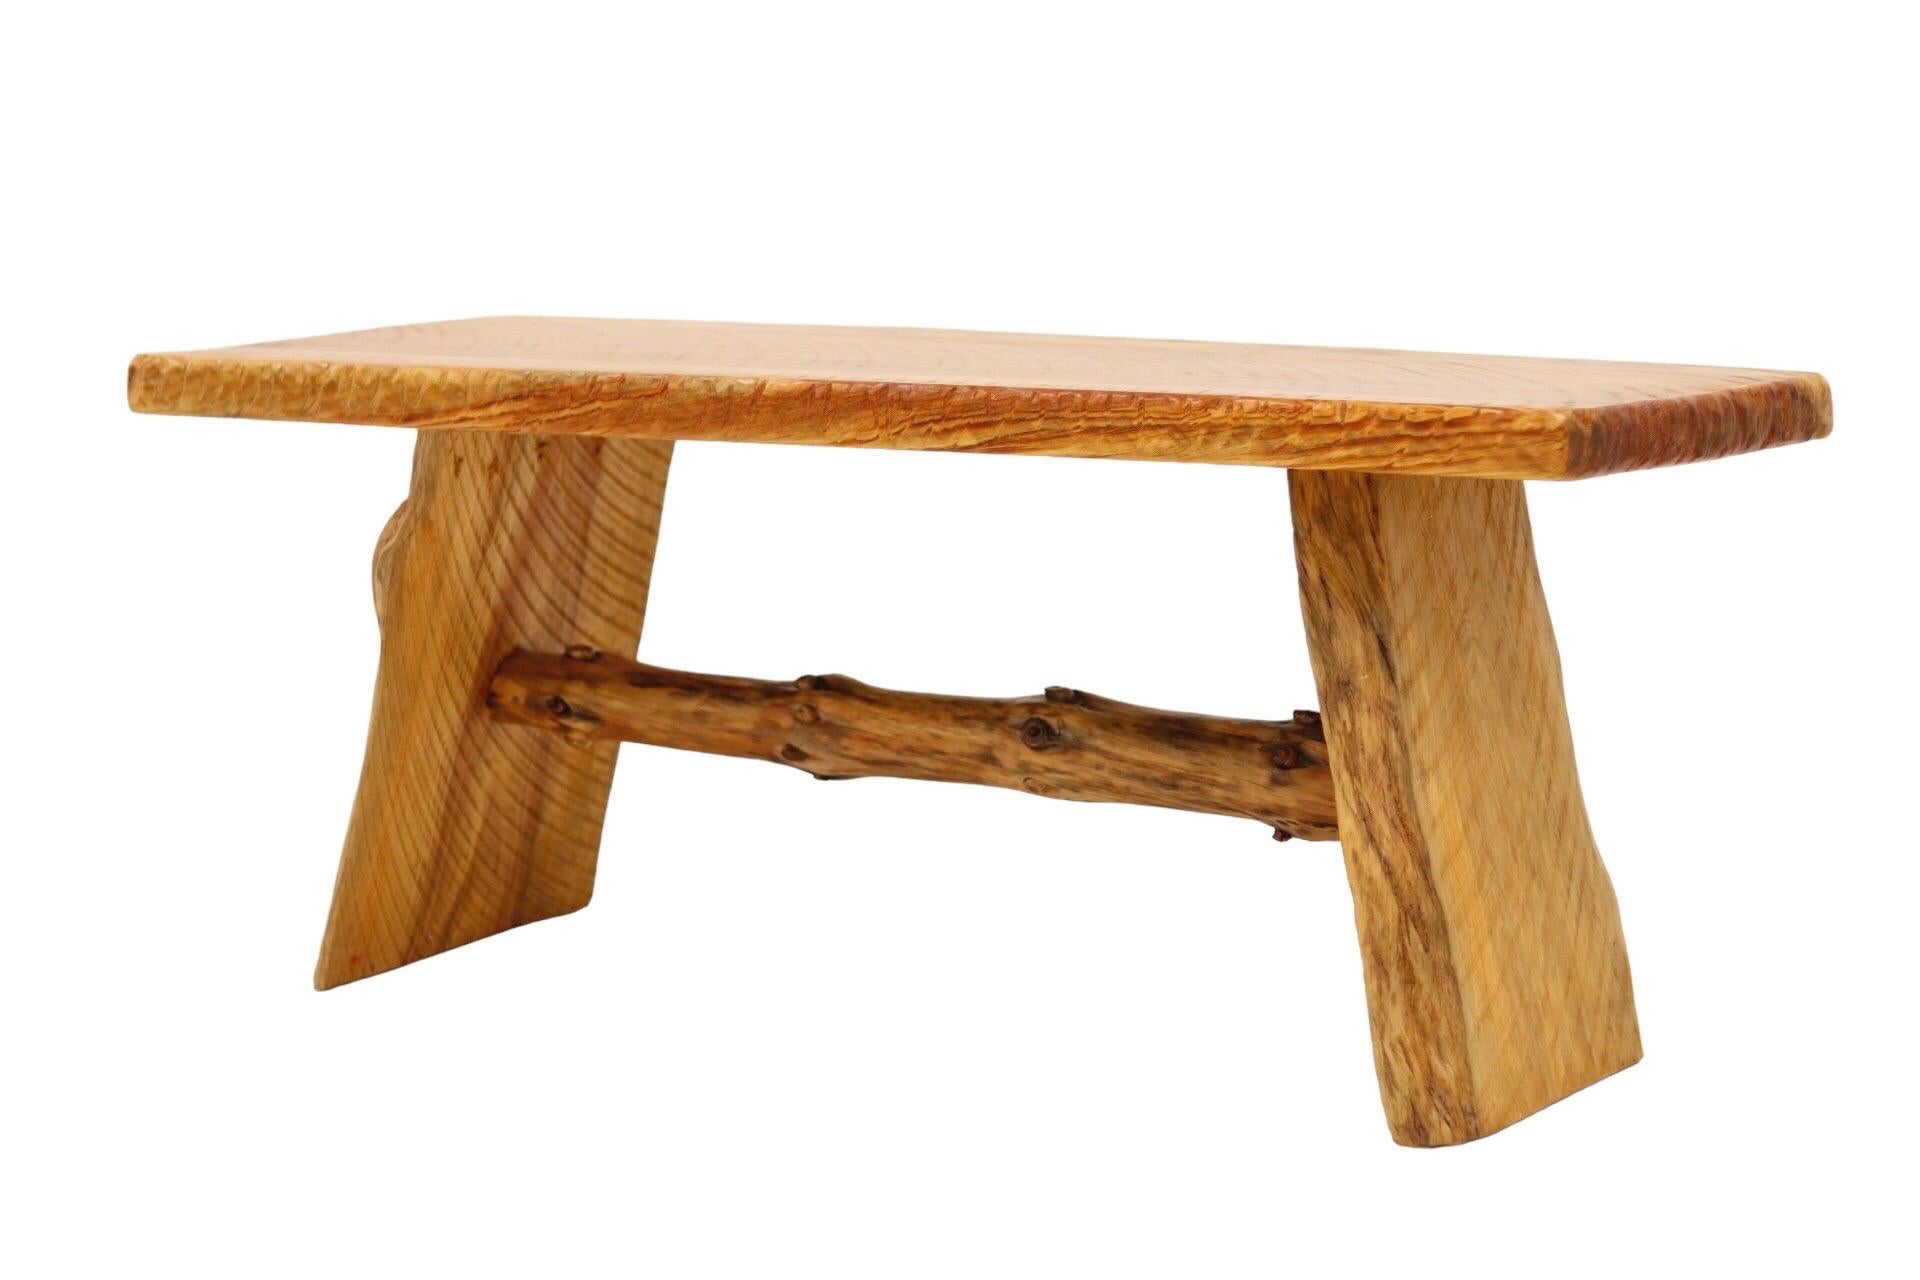 A rustic bench made from solid pine. Three pieces of richly grained plank wood have a natural live edge. Underneath a pine branch serves as a stretcher.
